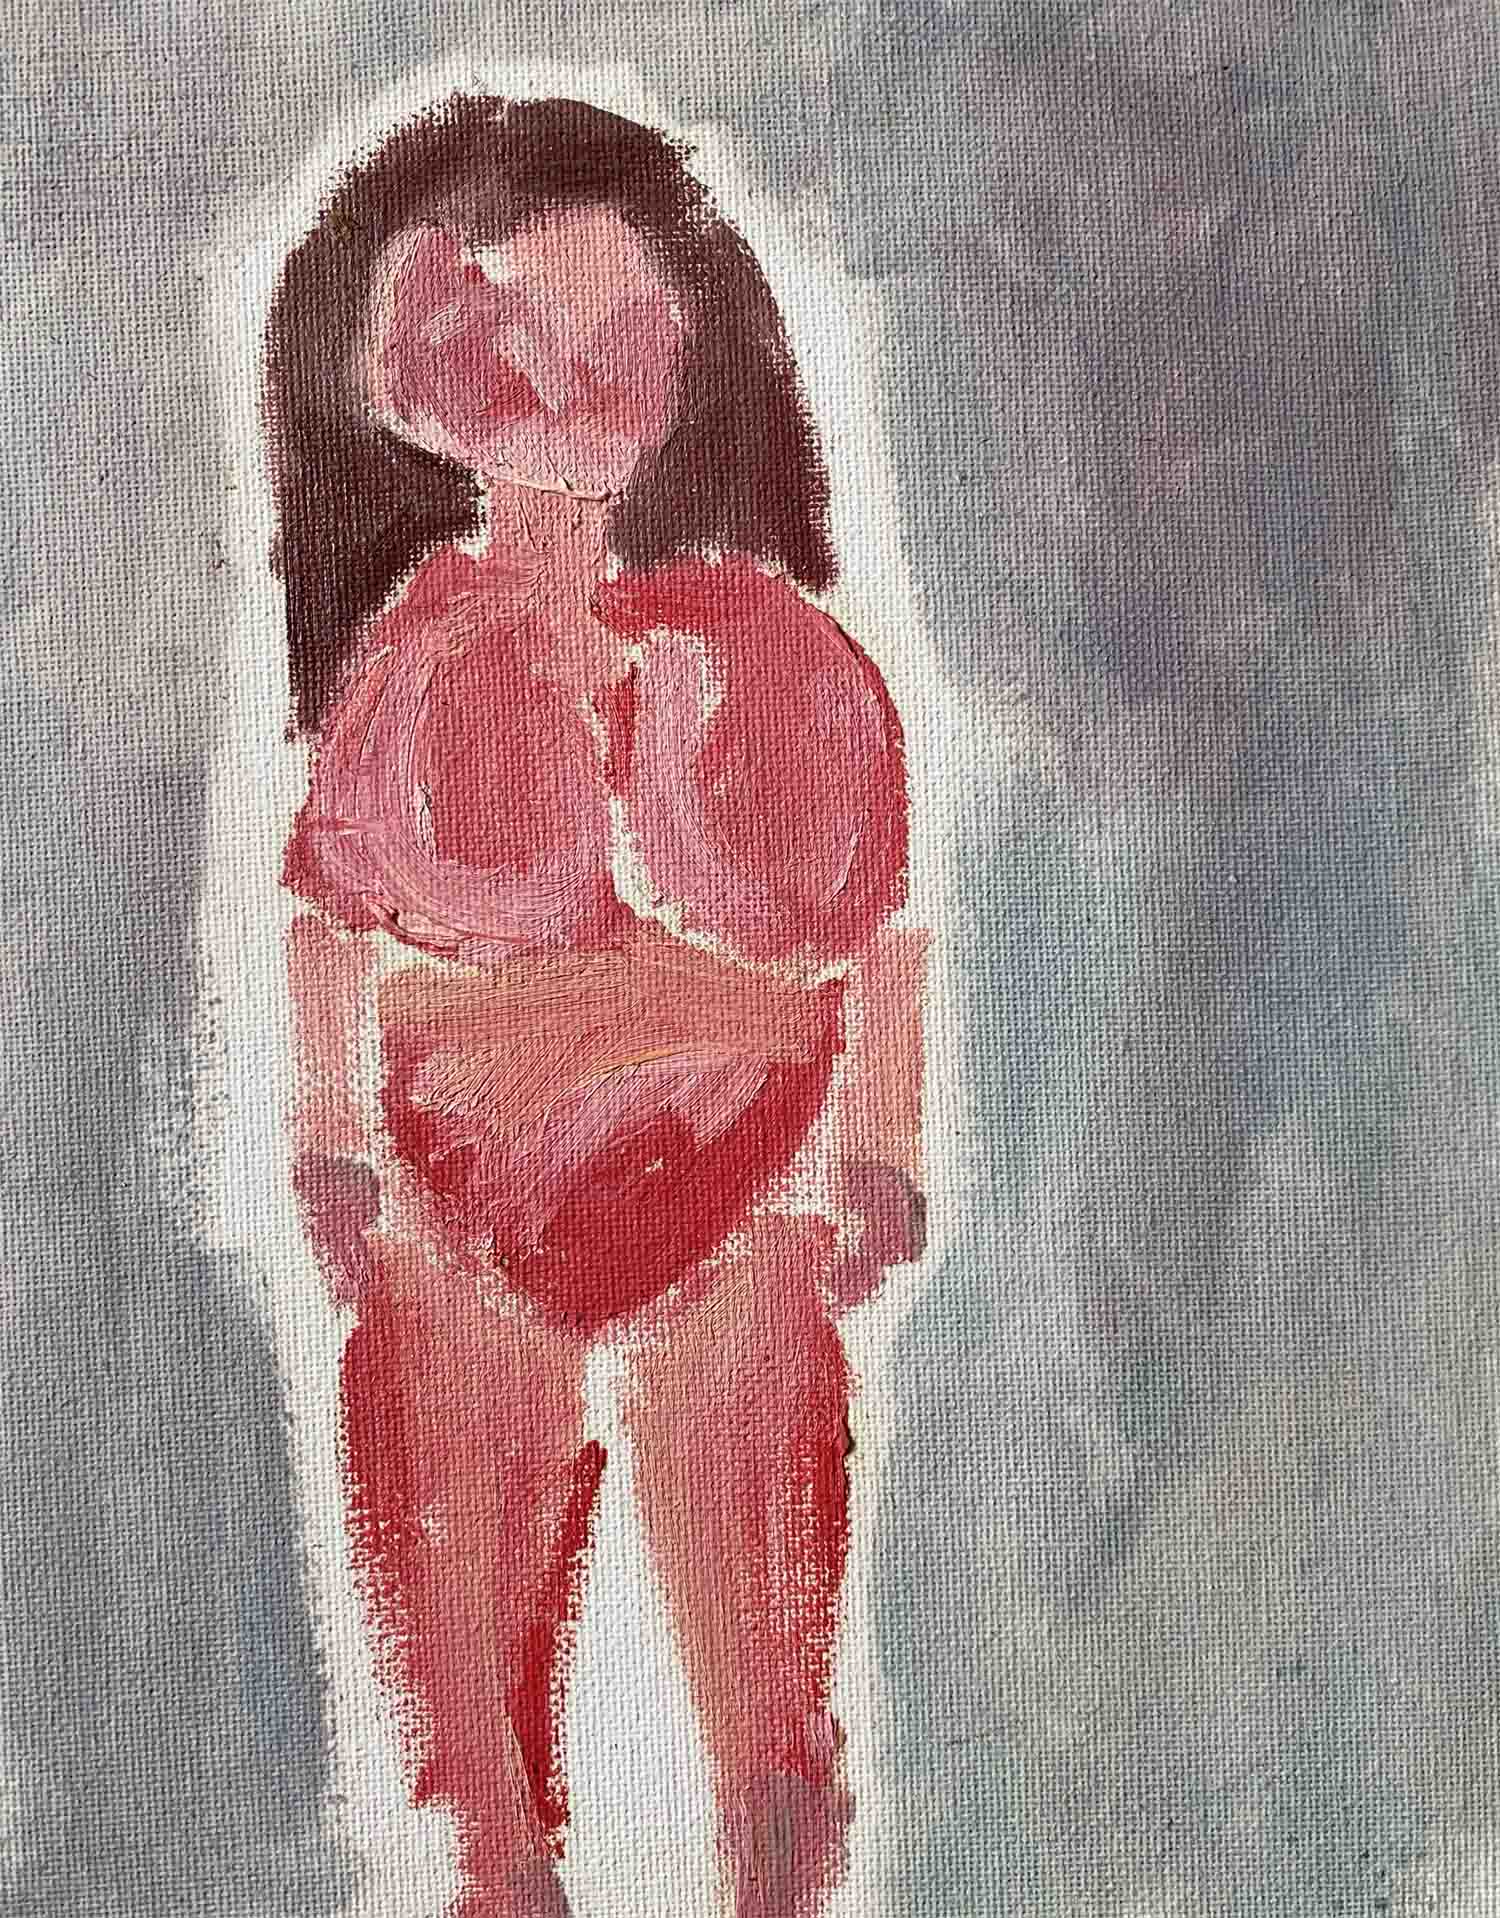 art every day number 636 / painting / pink nude